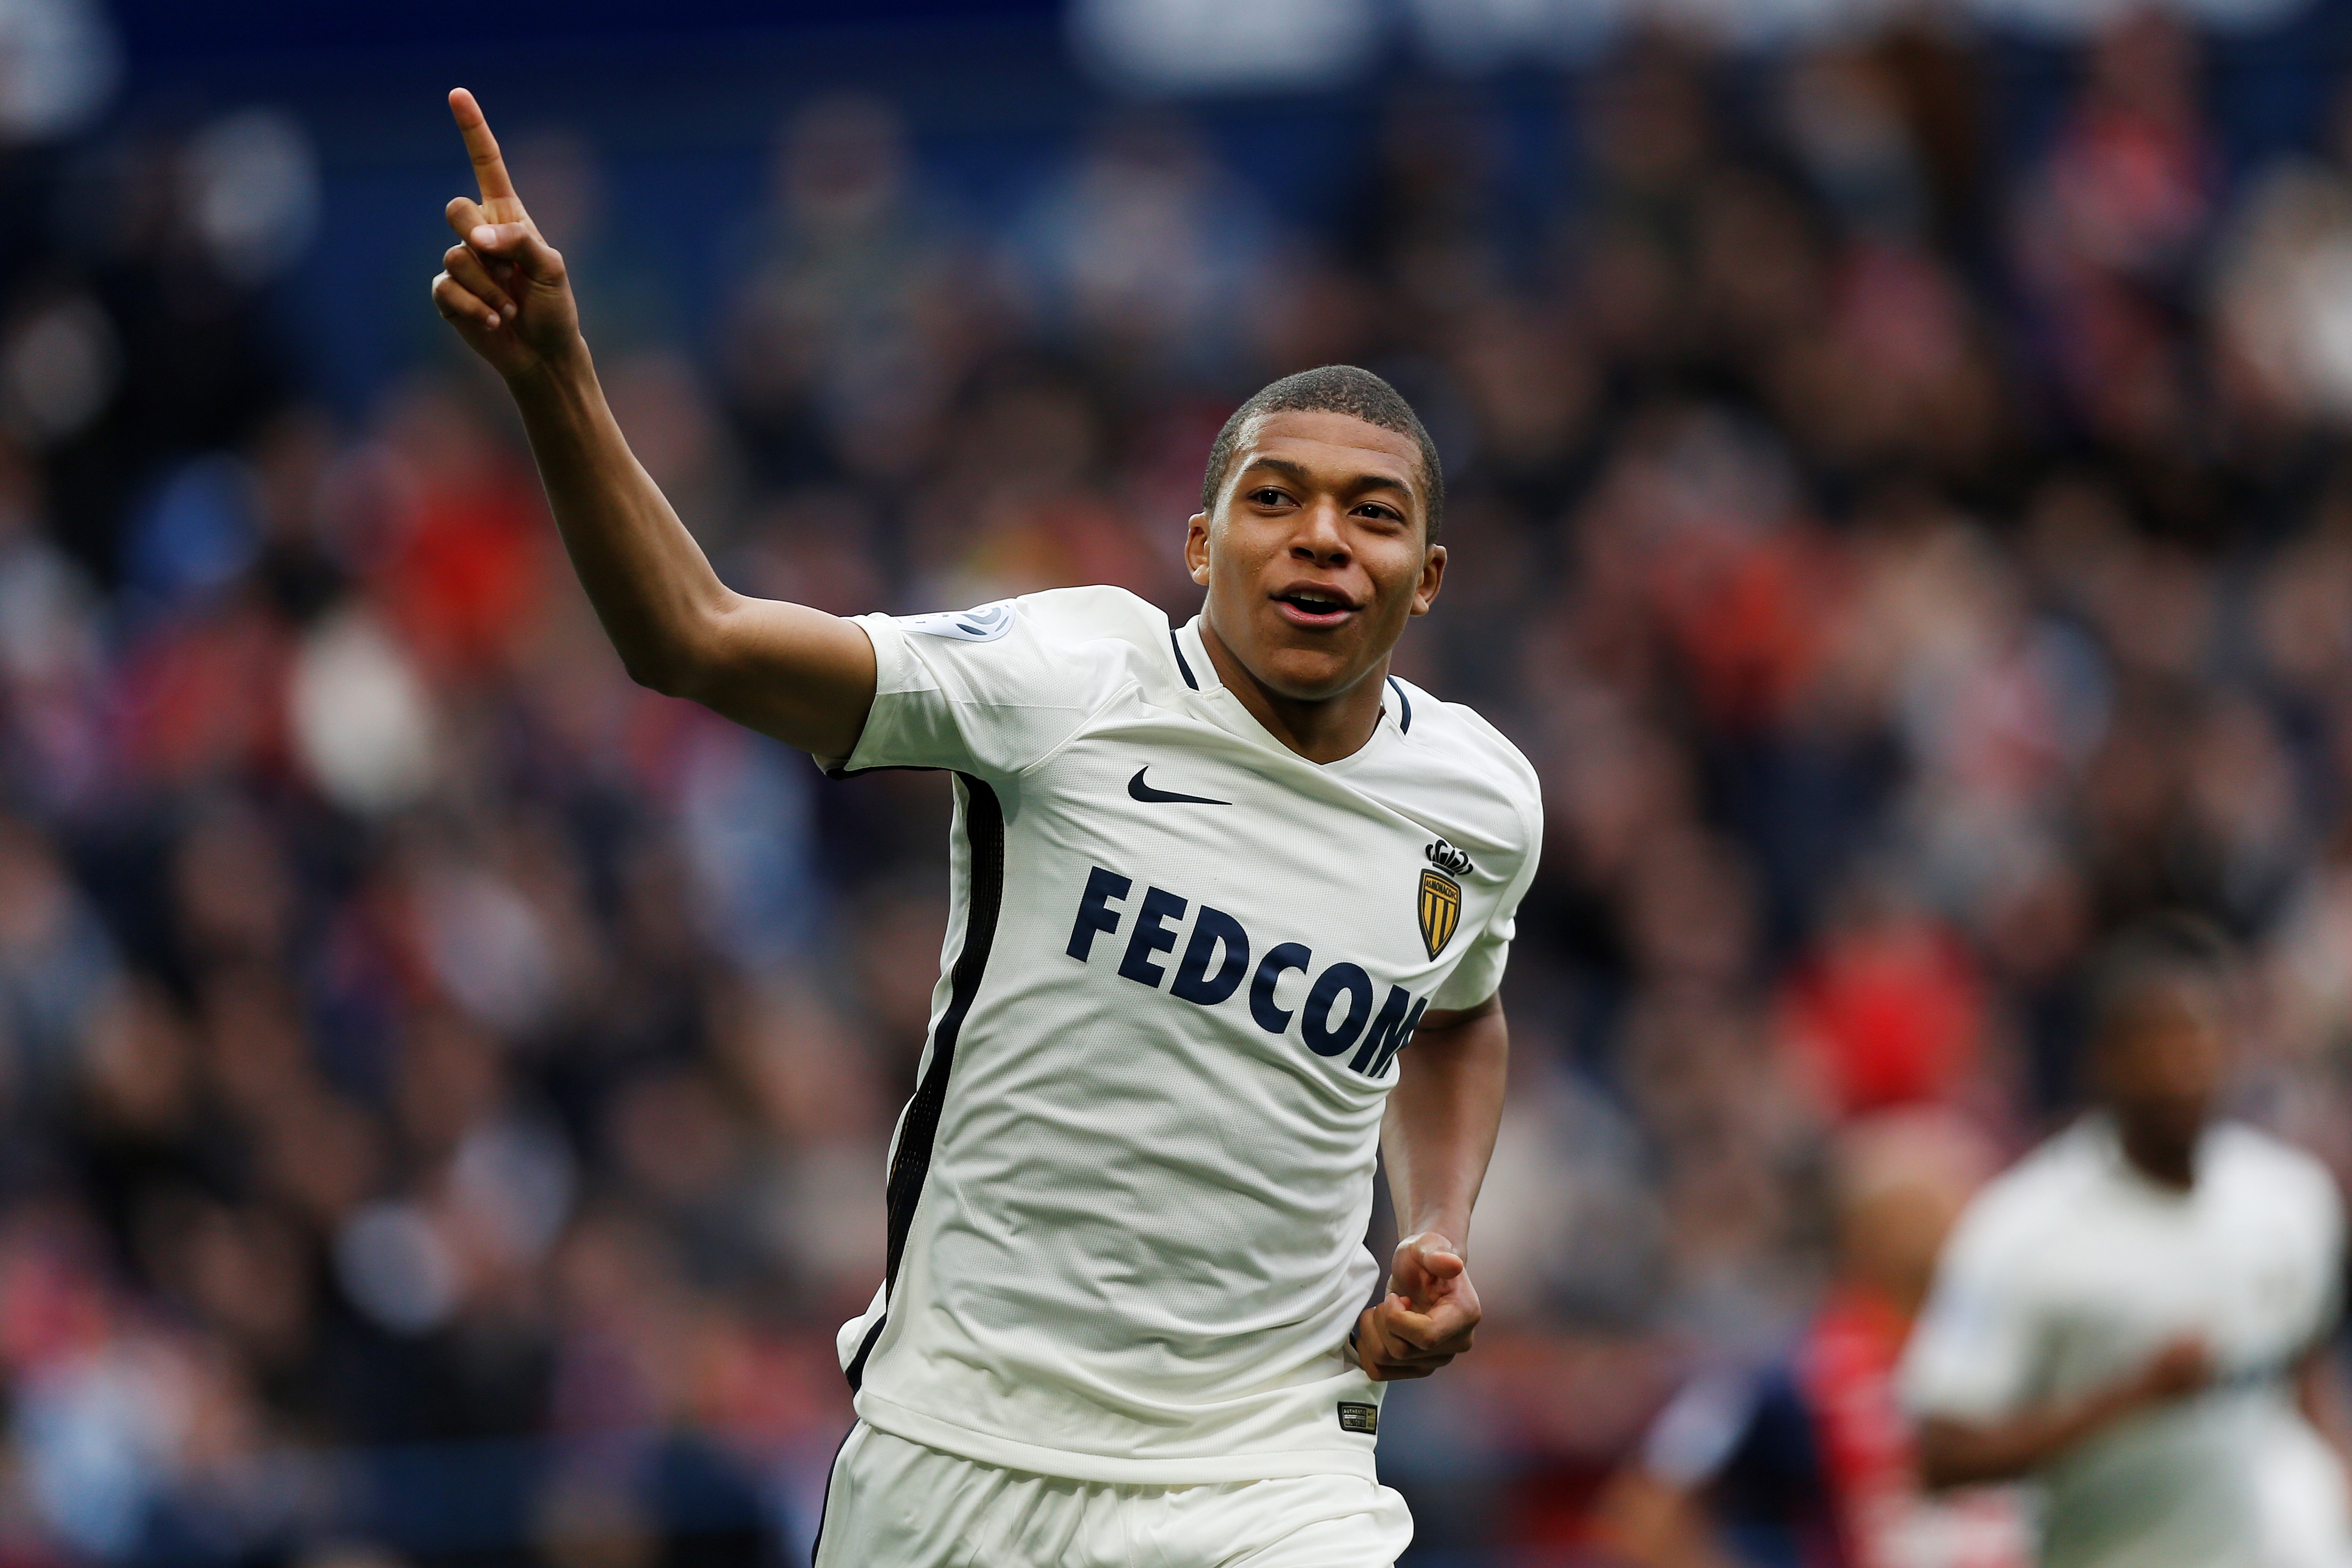 Monaco's French forward Kylian Mbappe Lottin celebrates after scoring a goal during the French L1 football match between Caen (SMC) and Monaco (AS), on March 19, 2017 at the Michel d'Ornano stadium, in Caen, northwestern France. / AFP PHOTO / CHARLY TRIBALLEAU        (Photo credit should read CHARLY TRIBALLEAU/AFP/Getty Images)